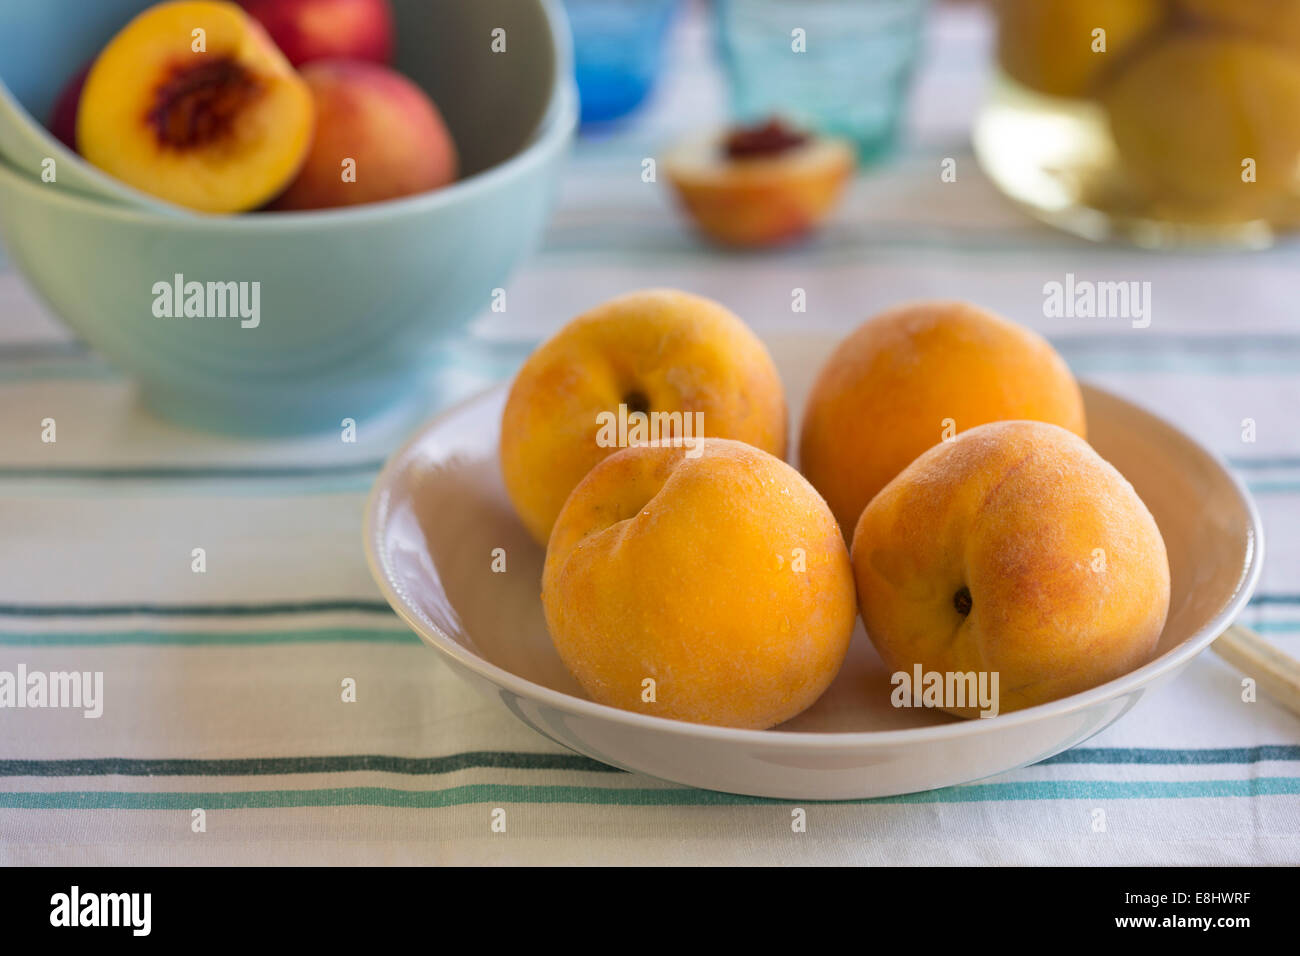 summer picnic of yellow peaches in a dish, with aqua bowls of nectarines and preserved peaches in background Stock Photo